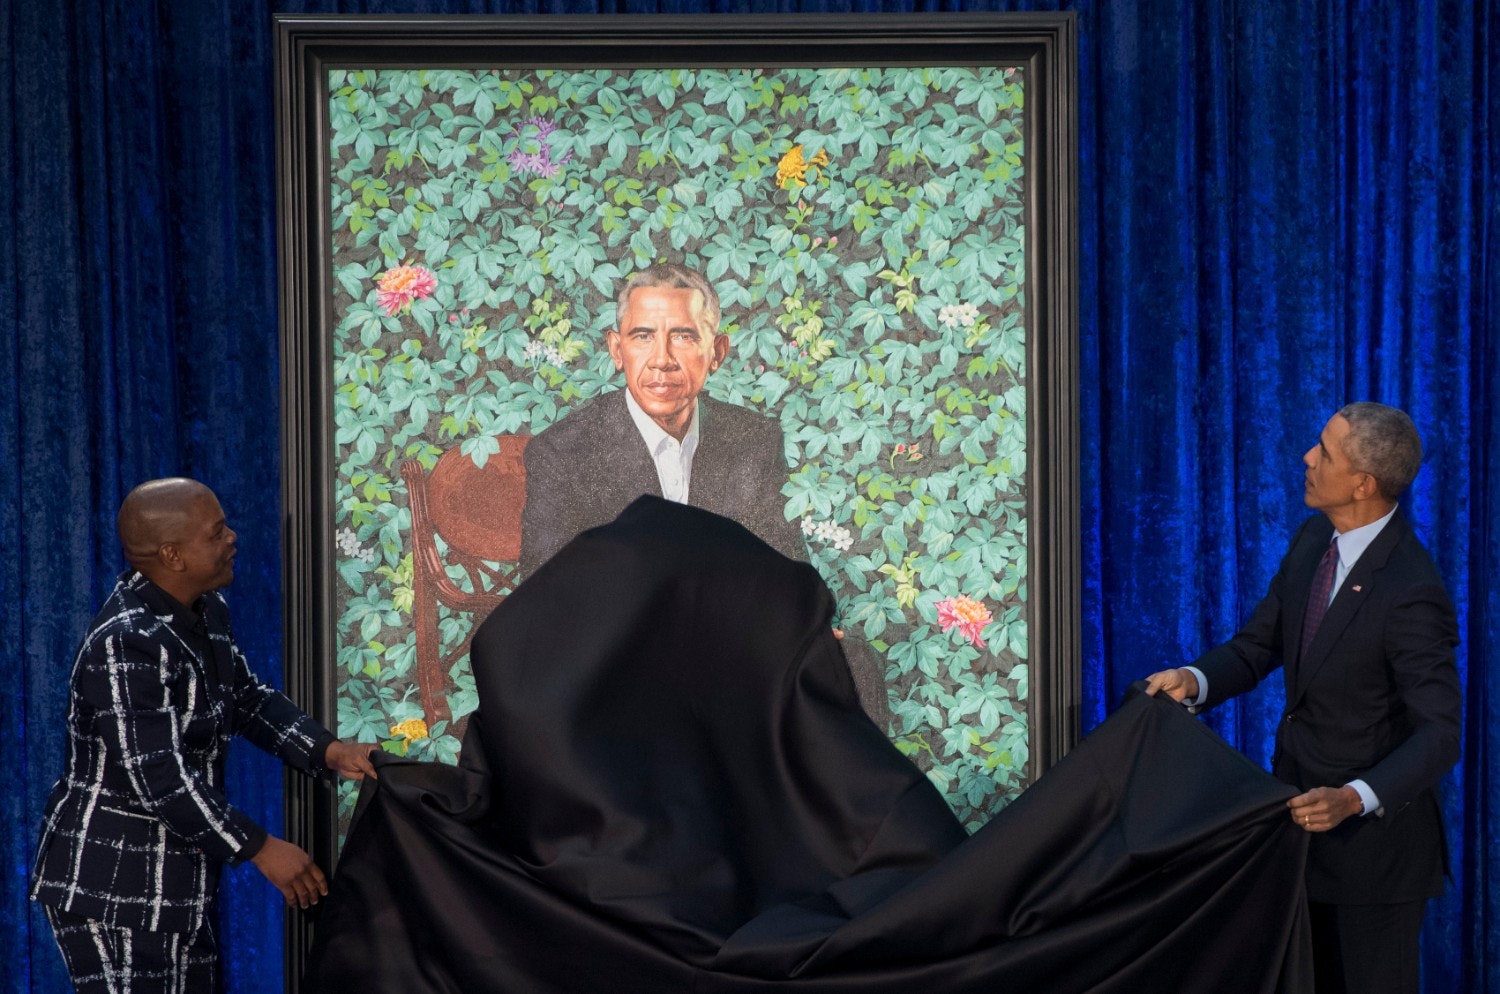 Barack Obama unveiling his portrait at the National Portrait Gallery